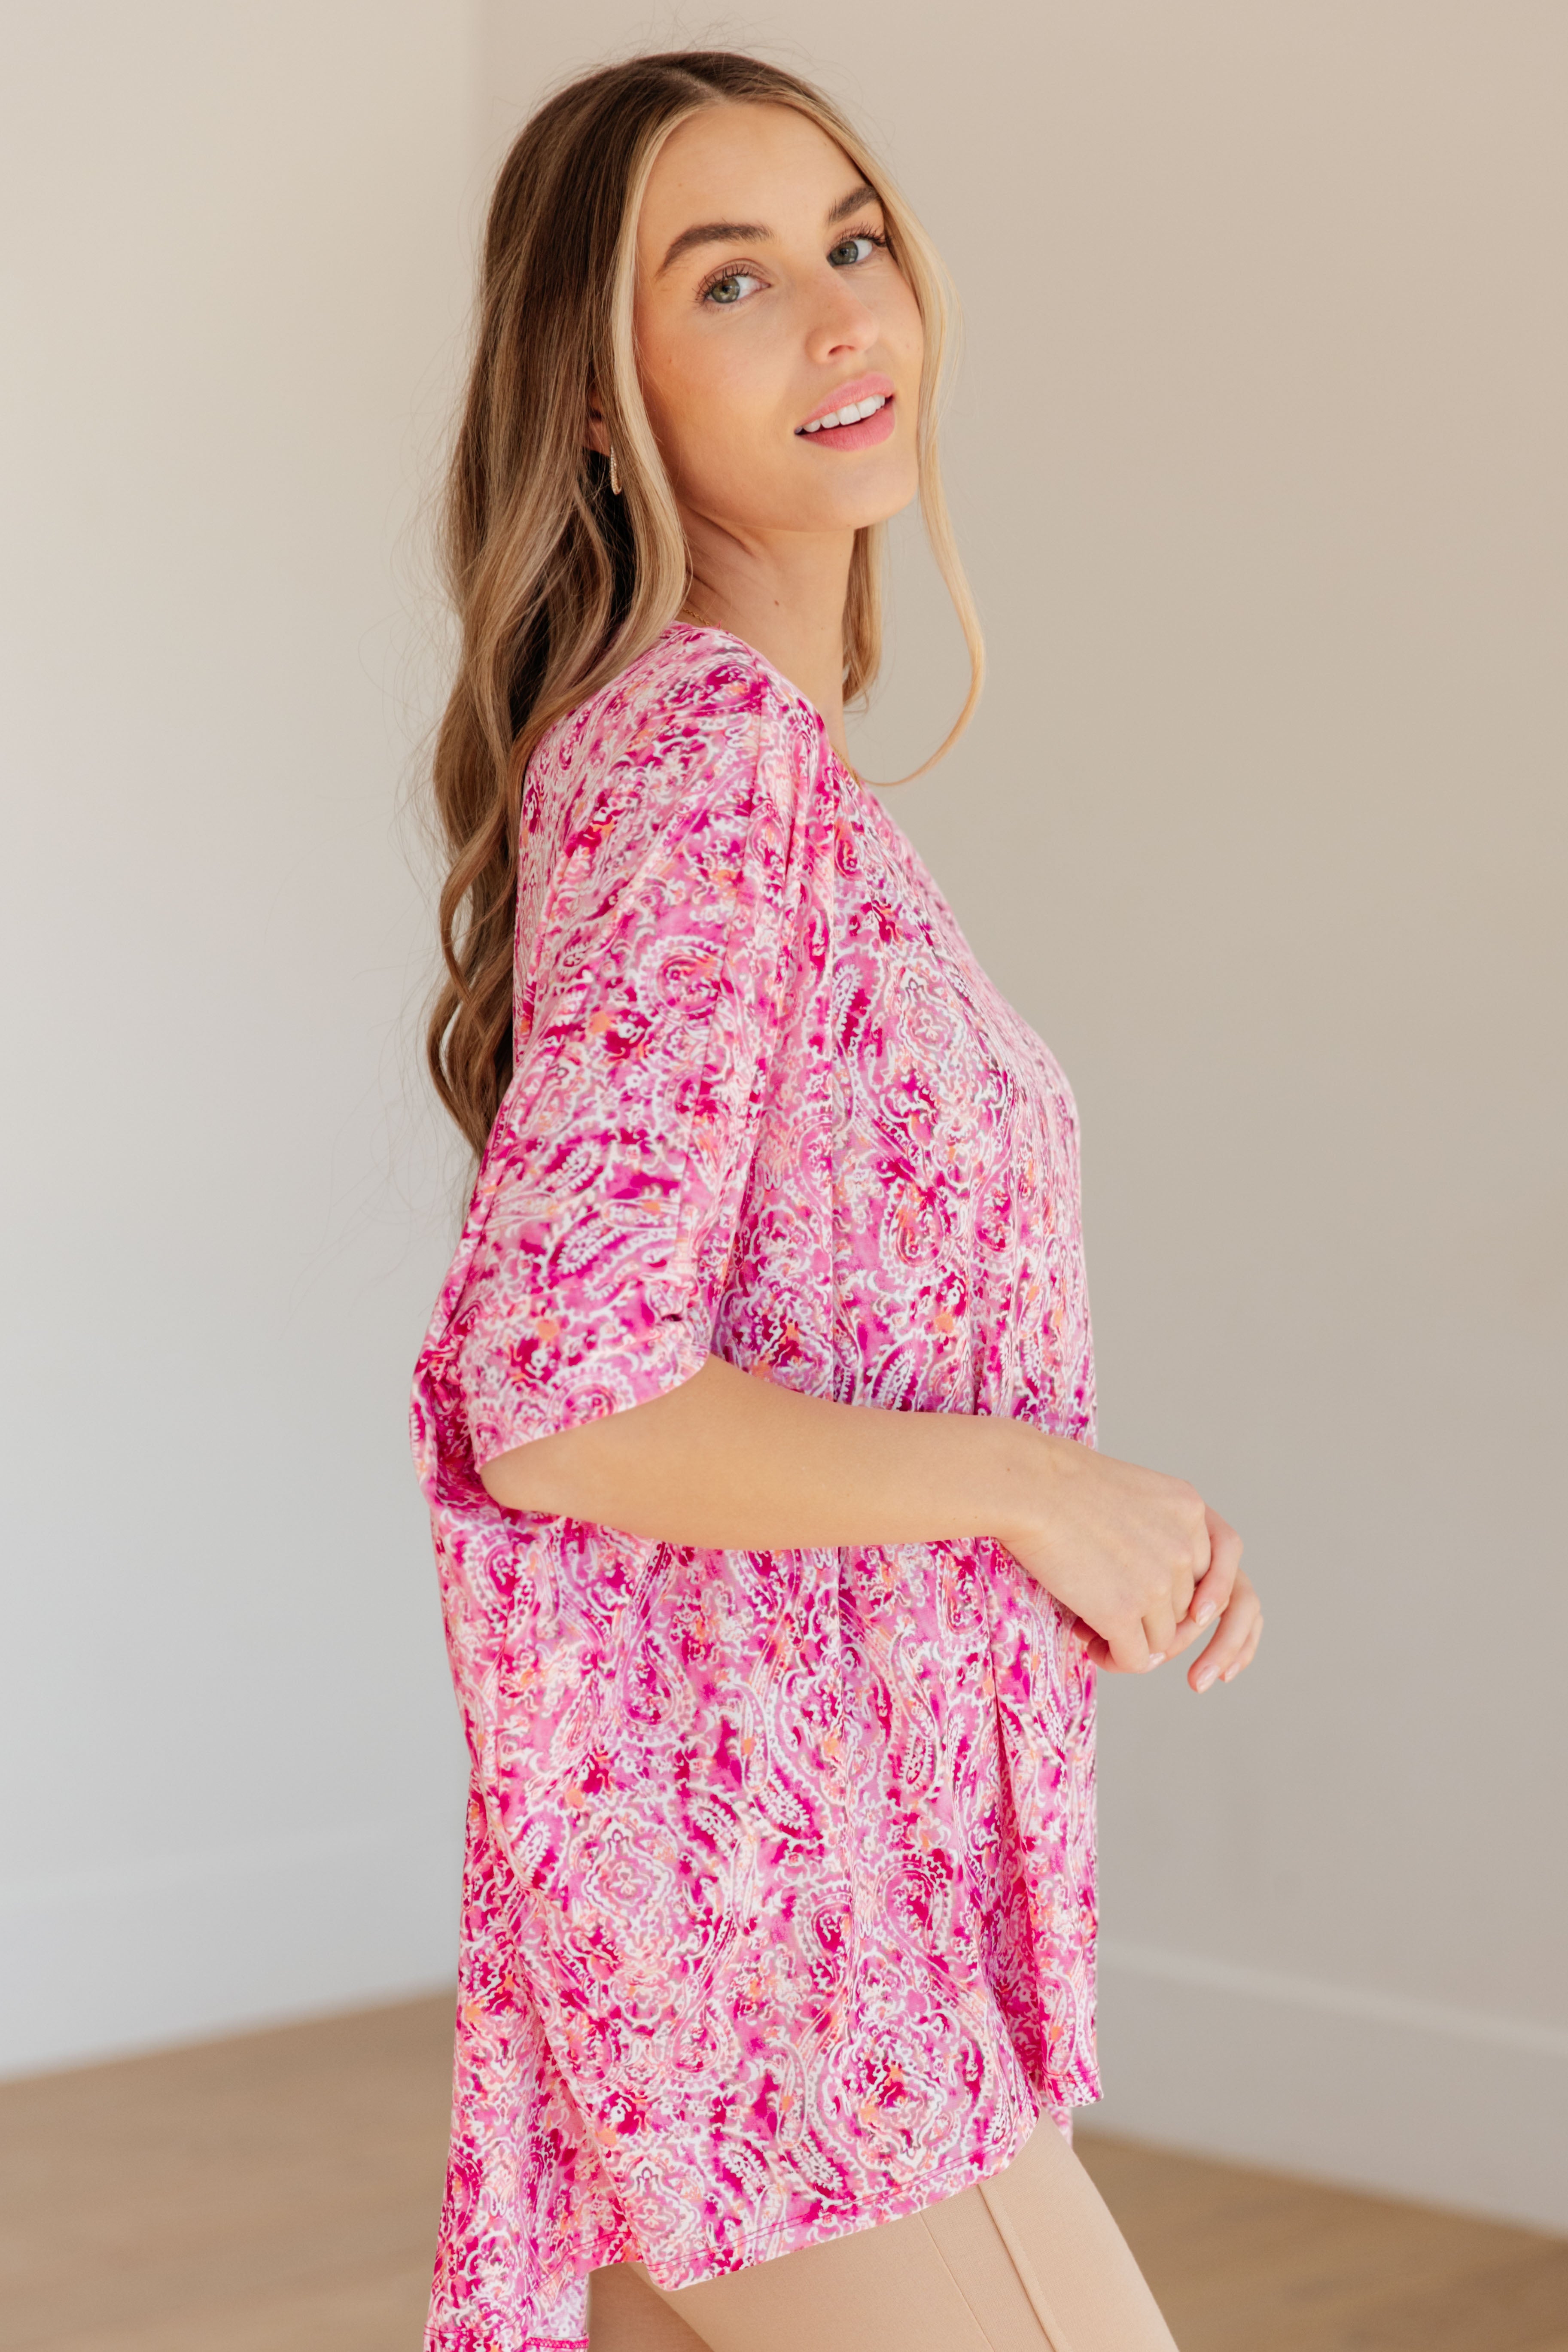 Dear Scarlett Essential Blouse in Fuchsia and White Paisley Final Sale Monday Markdown 06-10